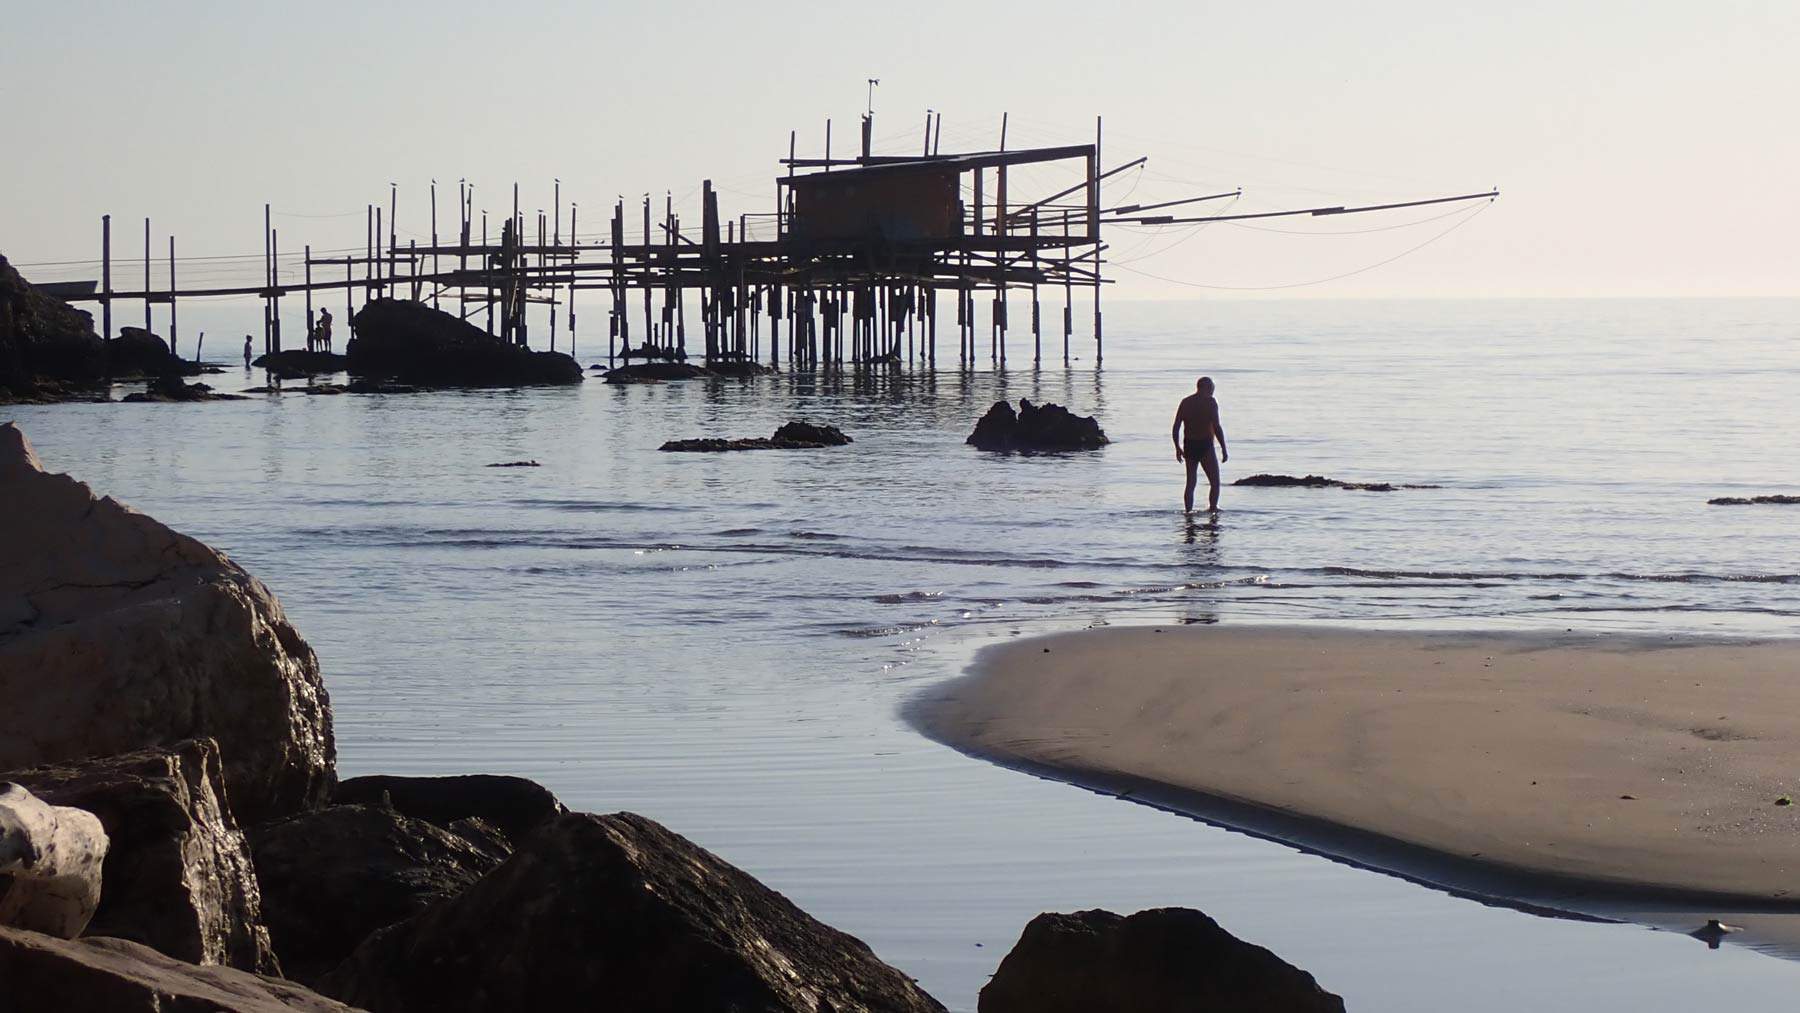 Abruzzo, Italia Nostra calls for protection of Trabocchi Coast against reckless interventions